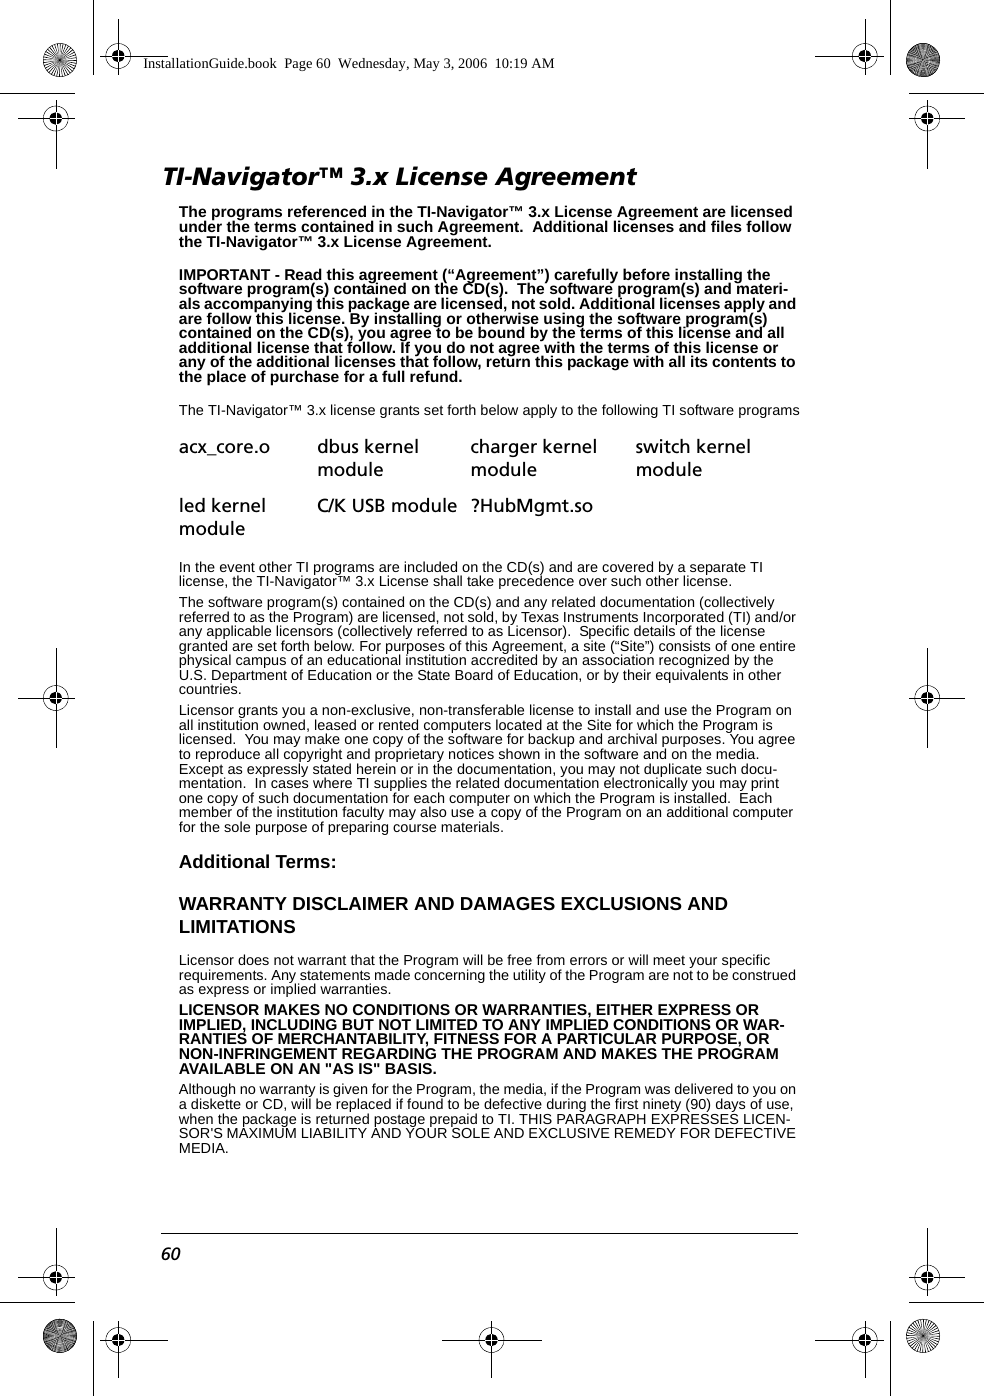 60TI-Navigator™ 3.x License AgreementThe programs referenced in the TI-Navigator™ 3.x License Agreement are licensed under the terms contained in such Agreement.  Additional licenses and files follow the TI-Navigator™ 3.x License Agreement. IMPORTANT - Read this agreement (“Agreement”) carefully before installing the software program(s) contained on the CD(s).  The software program(s) and materi-als accompanying this package are licensed, not sold. Additional licenses apply and are follow this license. By installing or otherwise using the software program(s) contained on the CD(s), you agree to be bound by the terms of this license and all additional license that follow. If you do not agree with the terms of this license or any of the additional licenses that follow, return this package with all its contents to the place of purchase for a full refund.The TI-Navigator™ 3.x license grants set forth below apply to the following TI software programsIn the event other TI programs are included on the CD(s) and are covered by a separate TI license, the TI-Navigator™ 3.x License shall take precedence over such other license. The software program(s) contained on the CD(s) and any related documentation (collectively referred to as the Program) are licensed, not sold, by Texas Instruments Incorporated (TI) and/or any applicable licensors (collectively referred to as Licensor).  Specific details of the license granted are set forth below. For purposes of this Agreement, a site (“Site”) consists of one entire physical campus of an educational institution accredited by an association recognized by the U.S. Department of Education or the State Board of Education, or by their equivalents in other countries.Licensor grants you a non-exclusive, non-transferable license to install and use the Program on all institution owned, leased or rented computers located at the Site for which the Program is licensed.  You may make one copy of the software for backup and archival purposes. You agree to reproduce all copyright and proprietary notices shown in the software and on the media. Except as expressly stated herein or in the documentation, you may not duplicate such docu-mentation.  In cases where TI supplies the related documentation electronically you may print one copy of such documentation for each computer on which the Program is installed.  Each member of the institution faculty may also use a copy of the Program on an additional computer for the sole purpose of preparing course materials.Additional Terms:WARRANTY DISCLAIMER AND DAMAGES EXCLUSIONS AND LIMITATIONSLicensor does not warrant that the Program will be free from errors or will meet your specific requirements. Any statements made concerning the utility of the Program are not to be construed as express or implied warranties.LICENSOR MAKES NO CONDITIONS OR WARRANTIES, EITHER EXPRESS OR IMPLIED, INCLUDING BUT NOT LIMITED TO ANY IMPLIED CONDITIONS OR WAR-RANTIES OF MERCHANTABILITY, FITNESS FOR A PARTICULAR PURPOSE, OR NON-INFRINGEMENT REGARDING THE PROGRAM AND MAKES THE PROGRAM AVAILABLE ON AN &quot;AS IS&quot; BASIS. Although no warranty is given for the Program, the media, if the Program was delivered to you on a diskette or CD, will be replaced if found to be defective during the first ninety (90) days of use, when the package is returned postage prepaid to TI. THIS PARAGRAPH EXPRESSES LICEN-SOR&apos;S MAXIMUM LIABILITY AND YOUR SOLE AND EXCLUSIVE REMEDY FOR DEFECTIVE MEDIA.acx_core.o dbus kernel modulecharger kernel moduleswitch kernel moduleled kernel moduleC/K USB module ?HubMgmt.soInstallationGuide.book  Page 60  Wednesday, May 3, 2006  10:19 AM